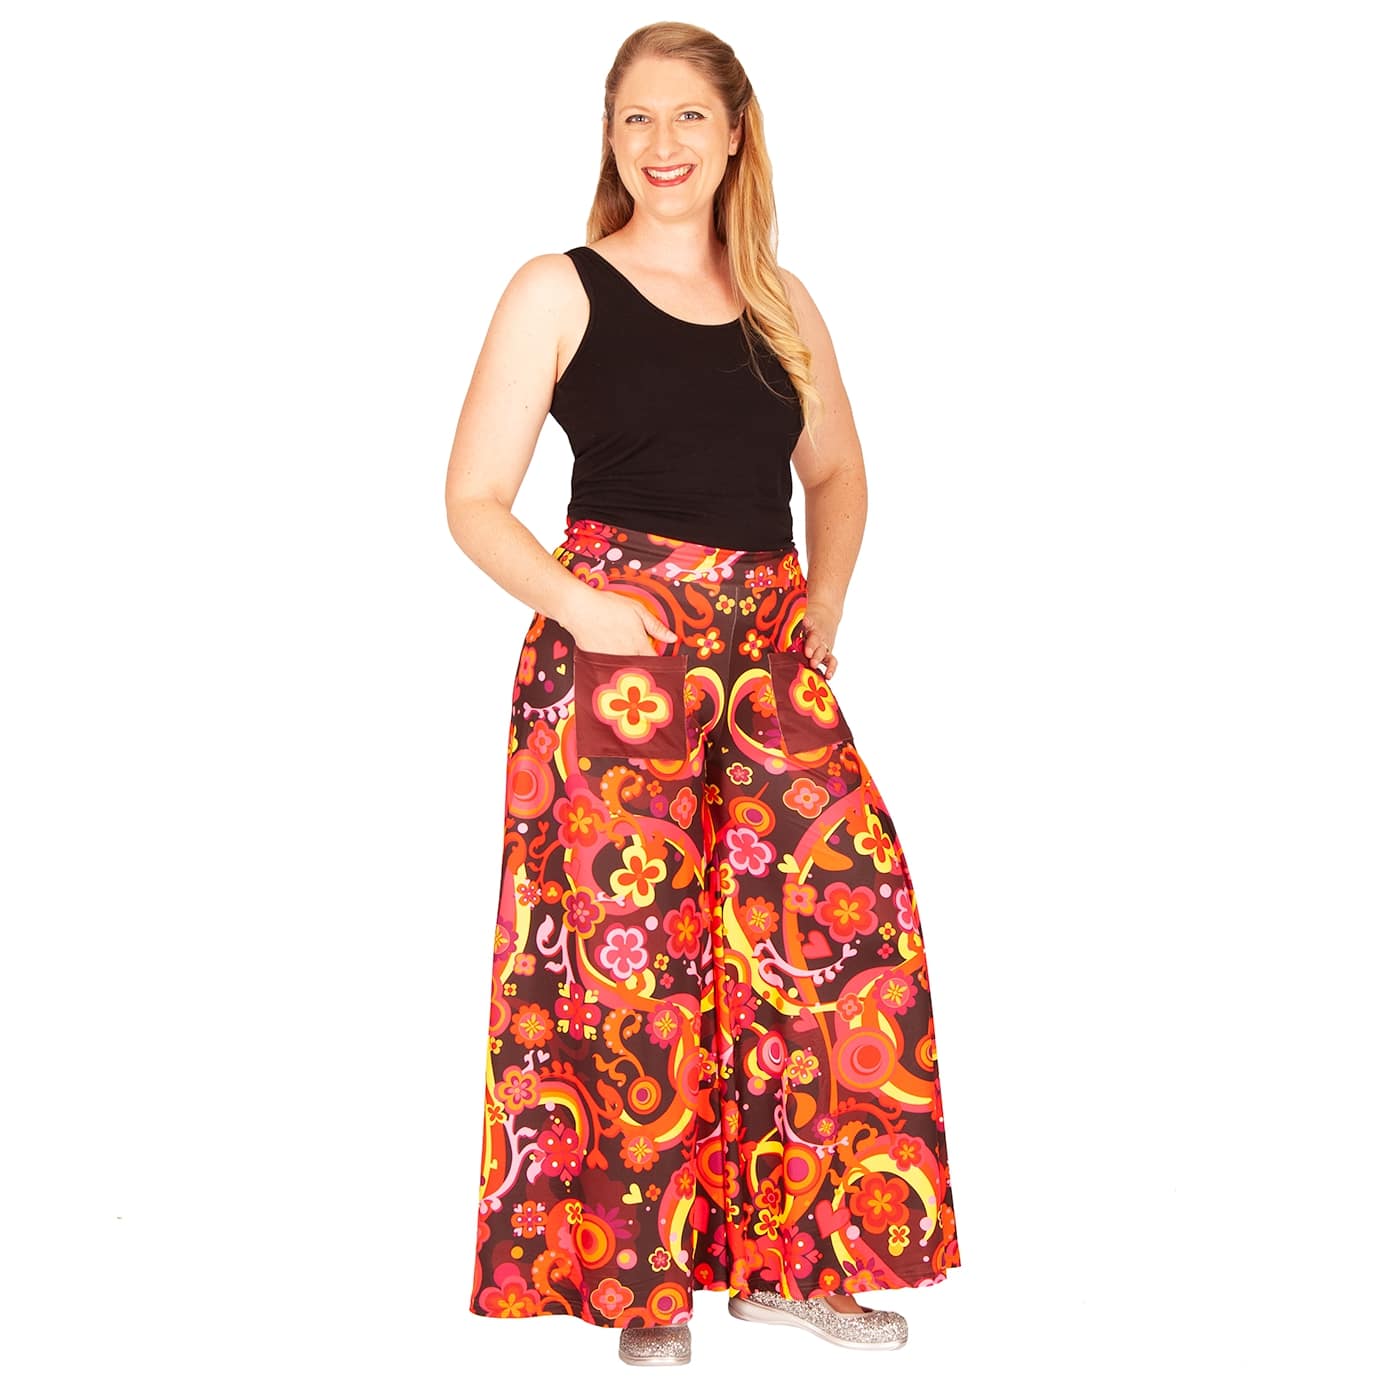 Groovy Days Wide Leg Pants by RainbowsAndFairies.com (Woodstock - Flower Power - Psychedelic - Hippy - Pallazo Pants - Flares Bell Bottoms - Vintage Inspired - Pants With Pockets) - SKU: CL_WIDEL_GROOV_DAY - Pic 04